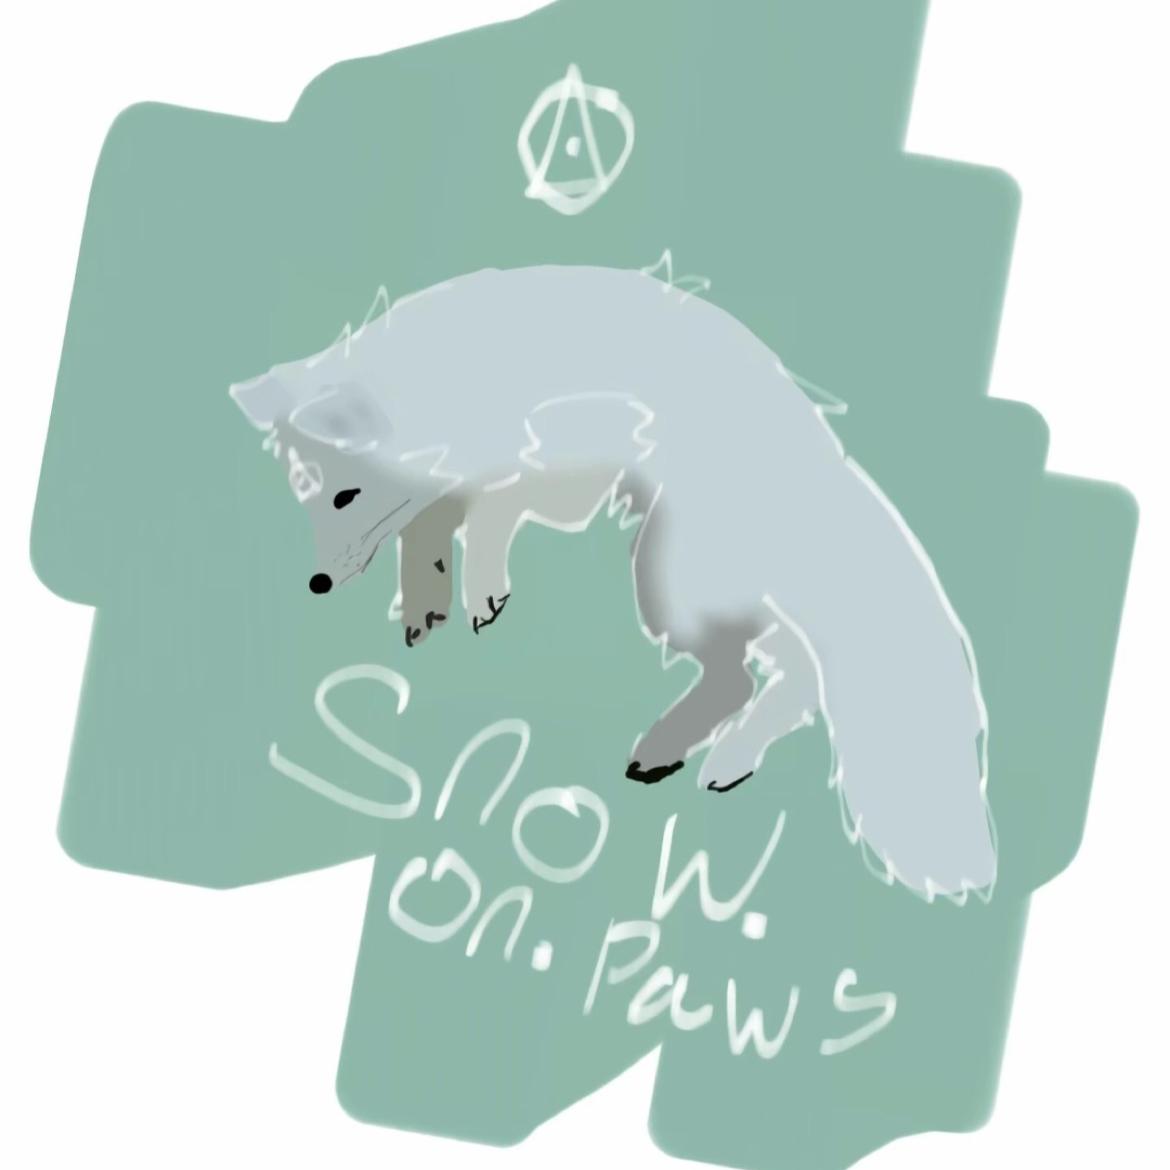 Snow.on pawz🍃🐾's images